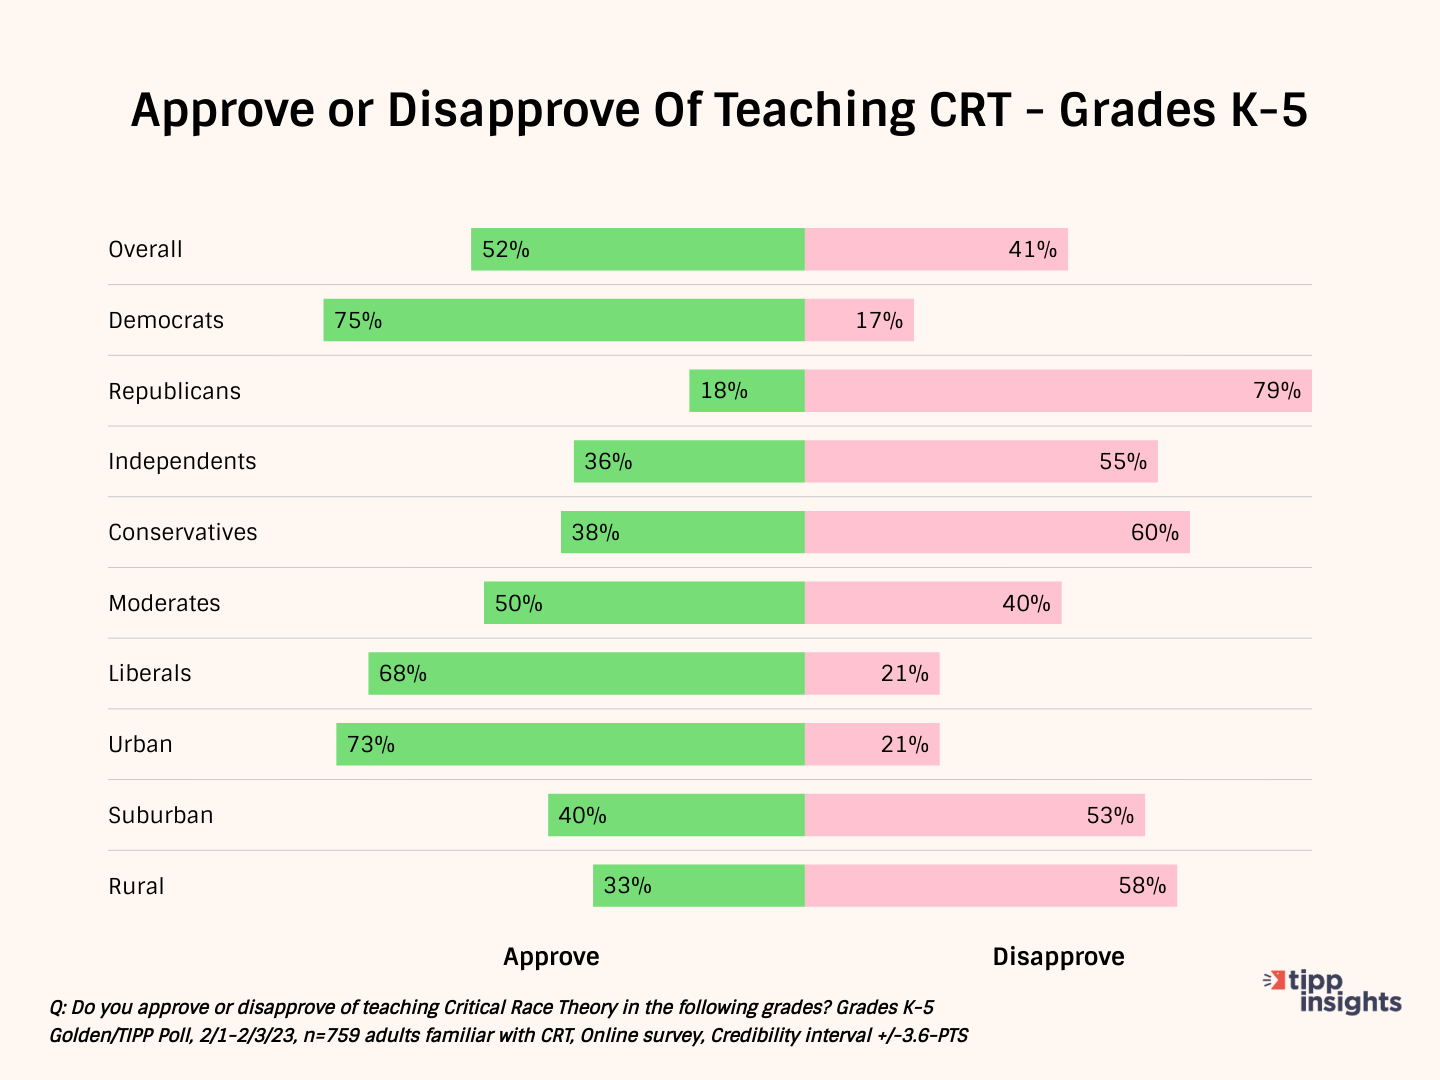 Critical Race Theory In Schools – Another Divisive Topic: Golden/TIPP Poll